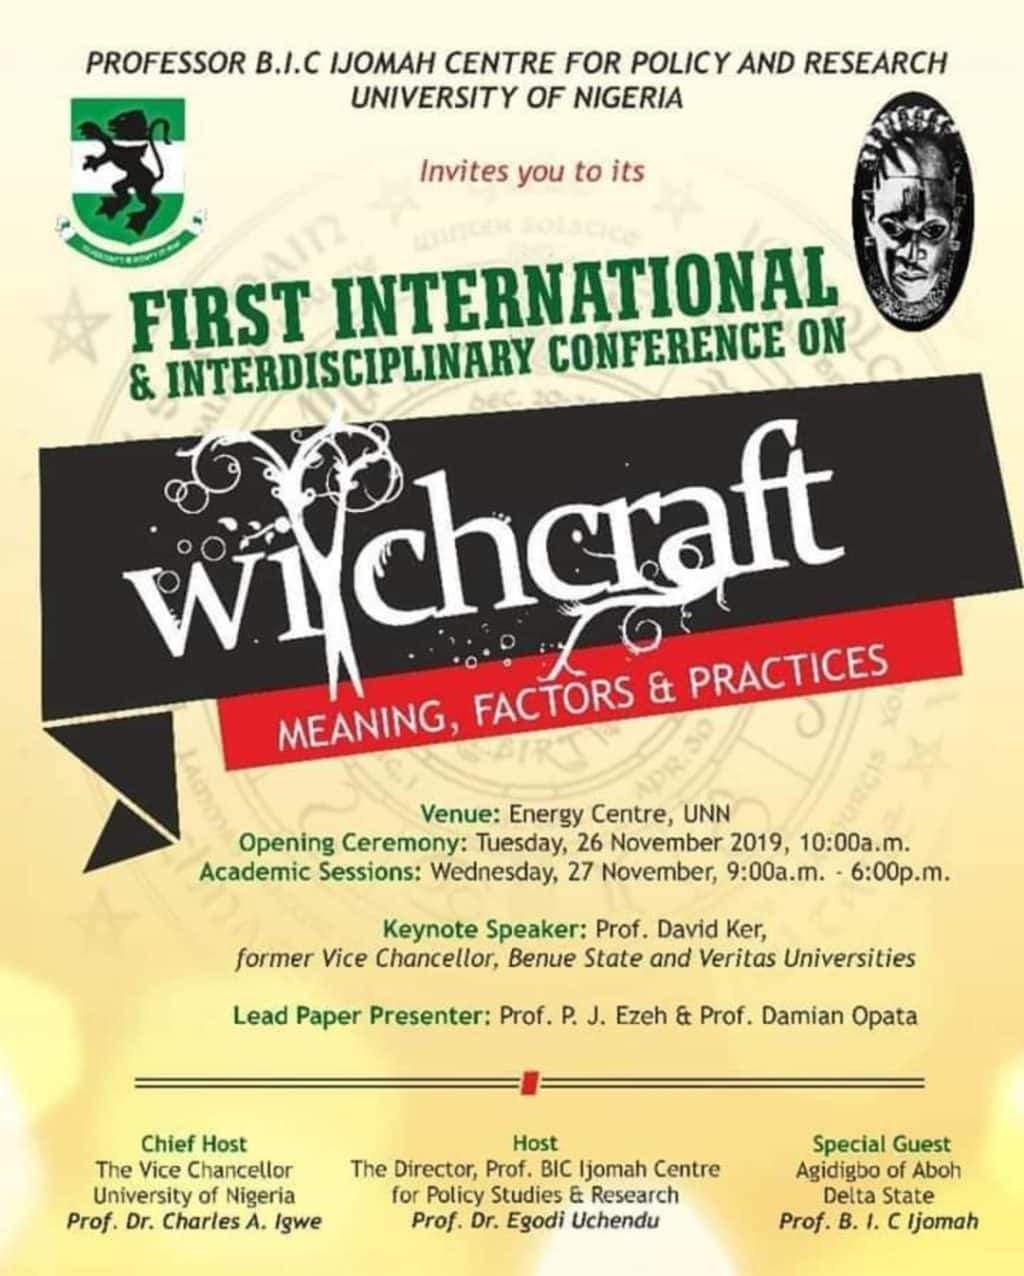 Prayer warrior calls on God as UNN sets to hold a conference on witchcraft